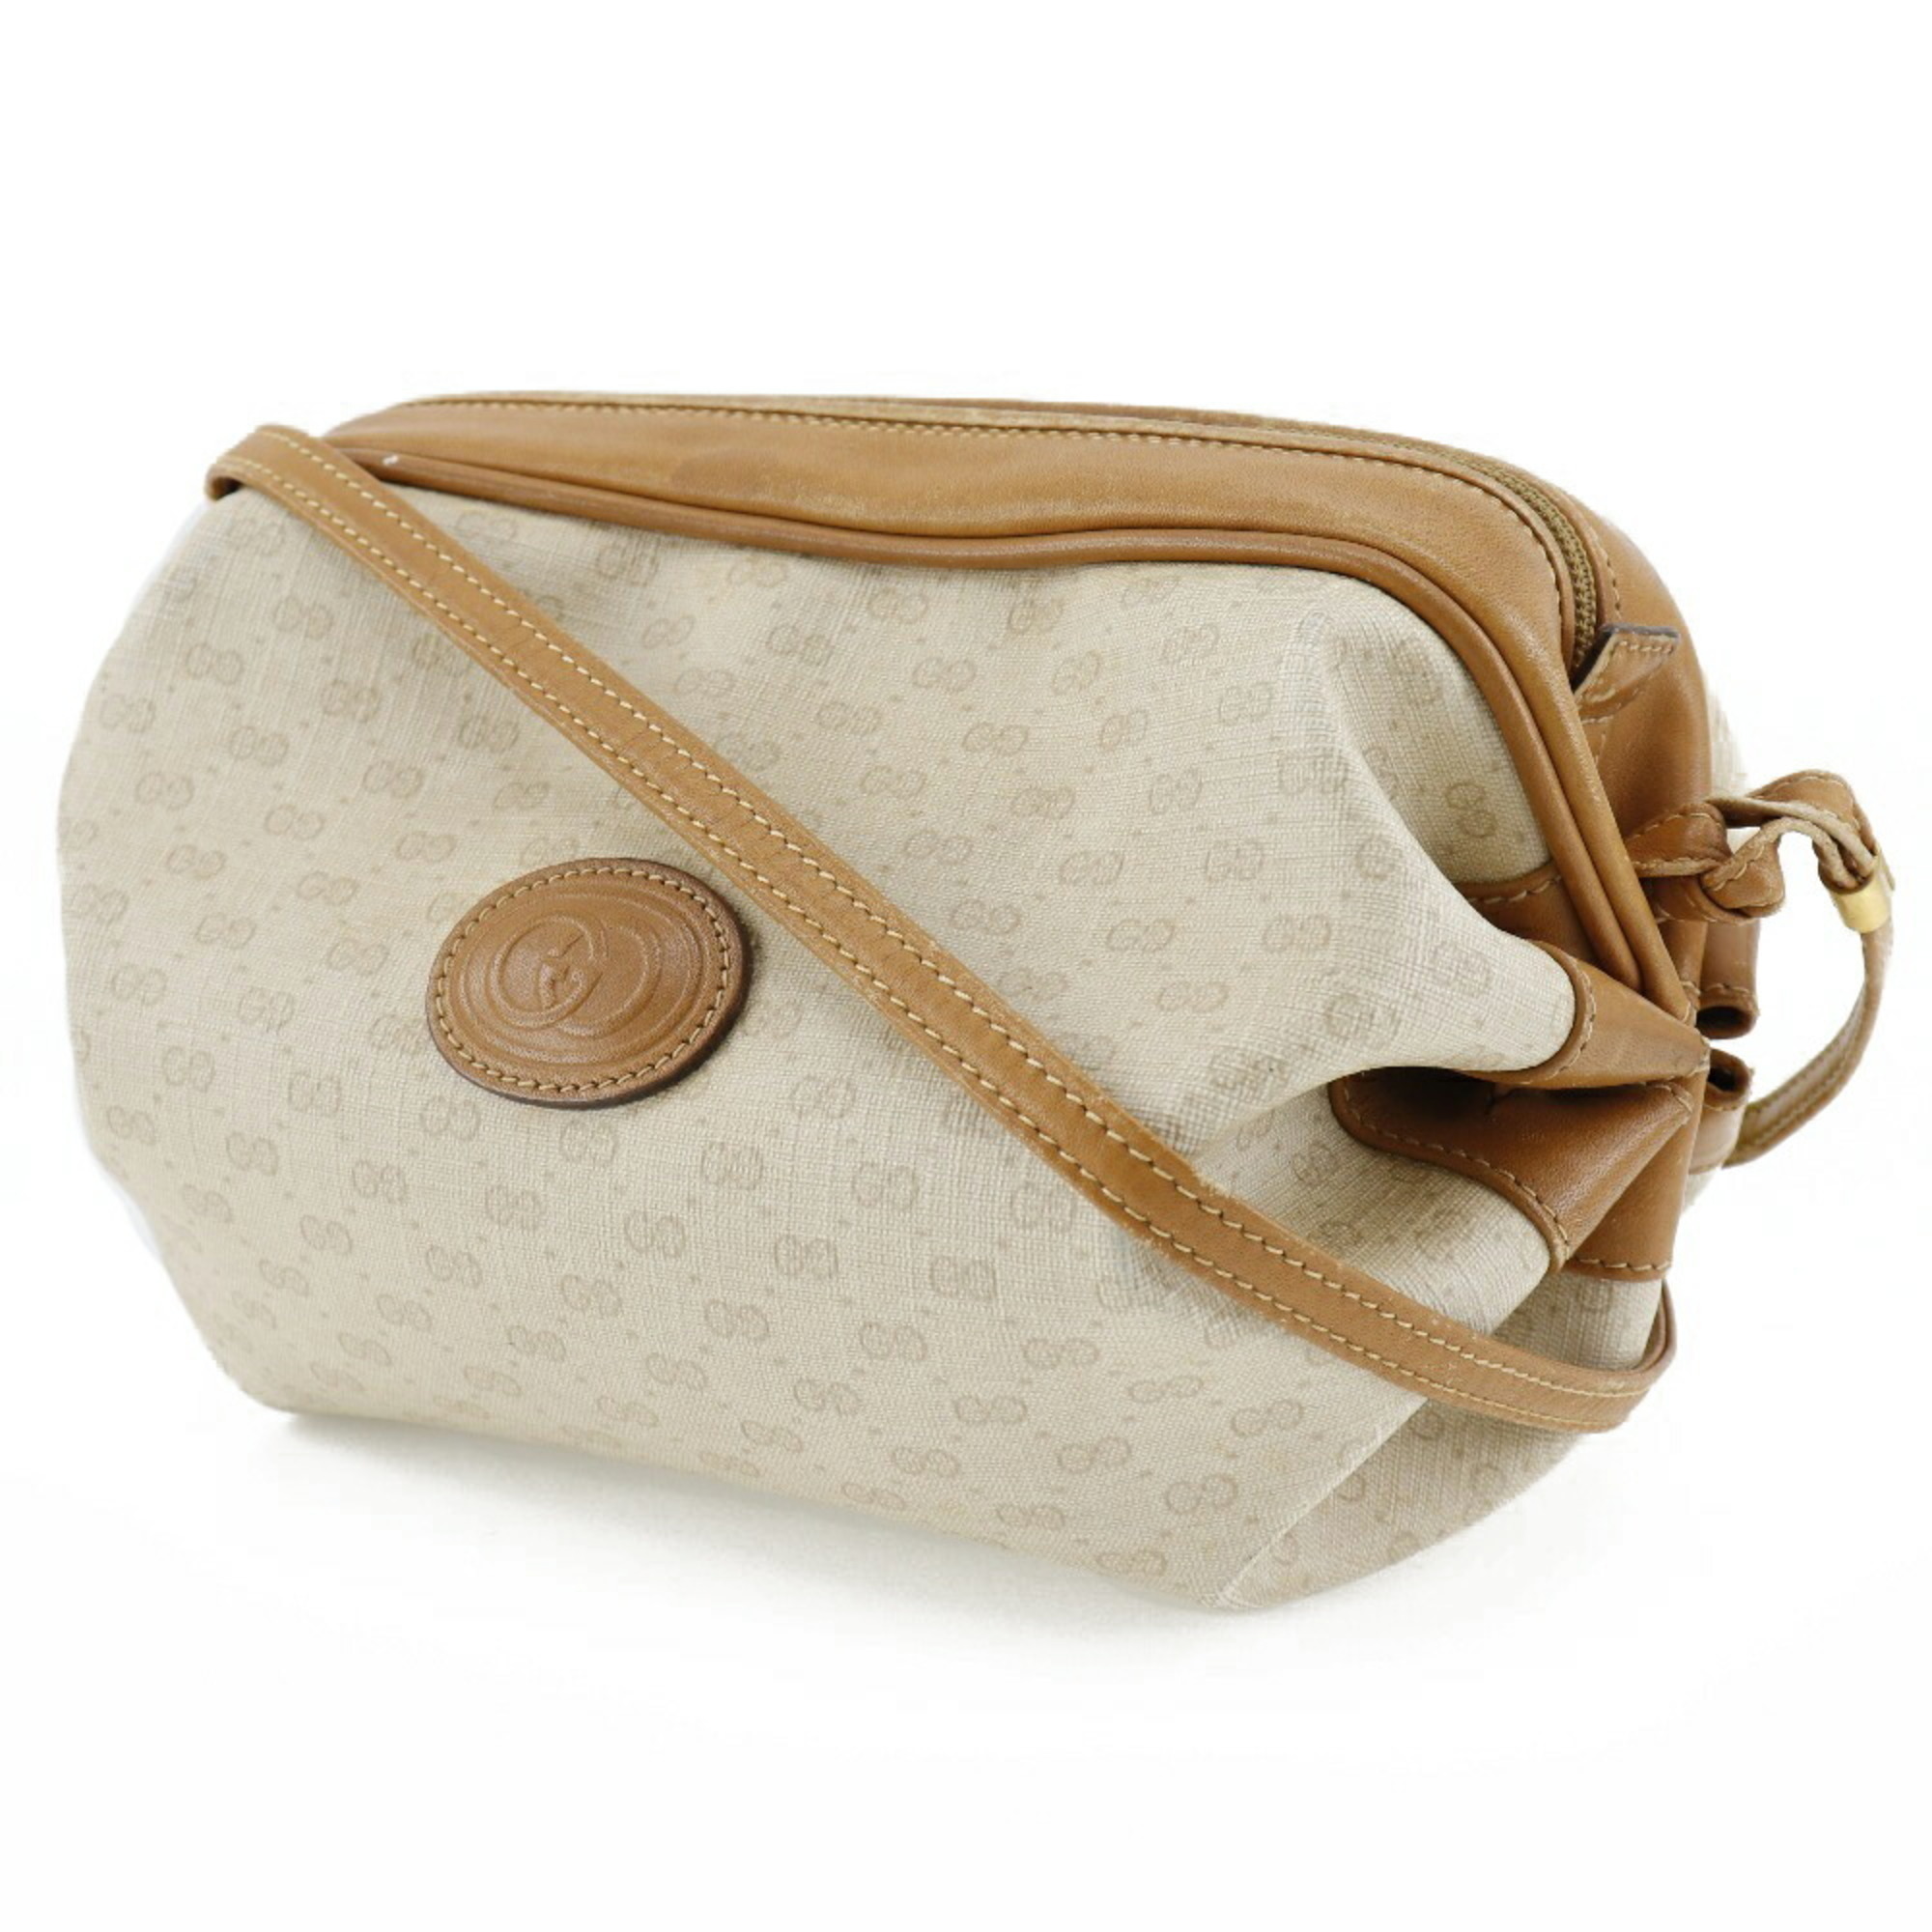 GUCCI Old Gucci Shoulder Bag 077-115-5770 PVC Coated Canvas Made in Italy Beige Crossbody Zipper Women's